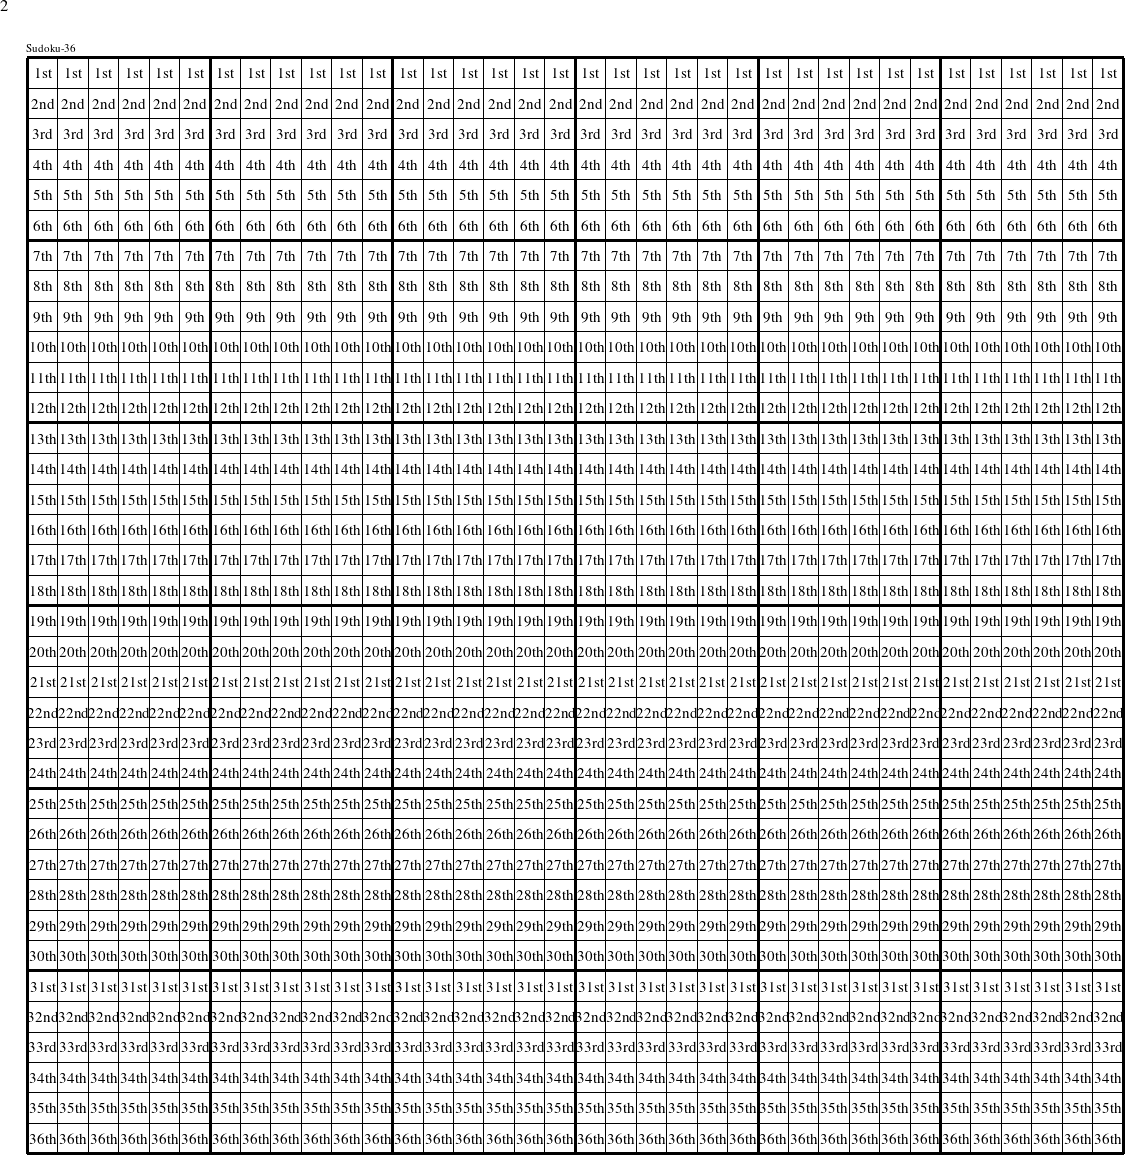 Each row is a group numbered as shown in this Sudoku-36 figure.